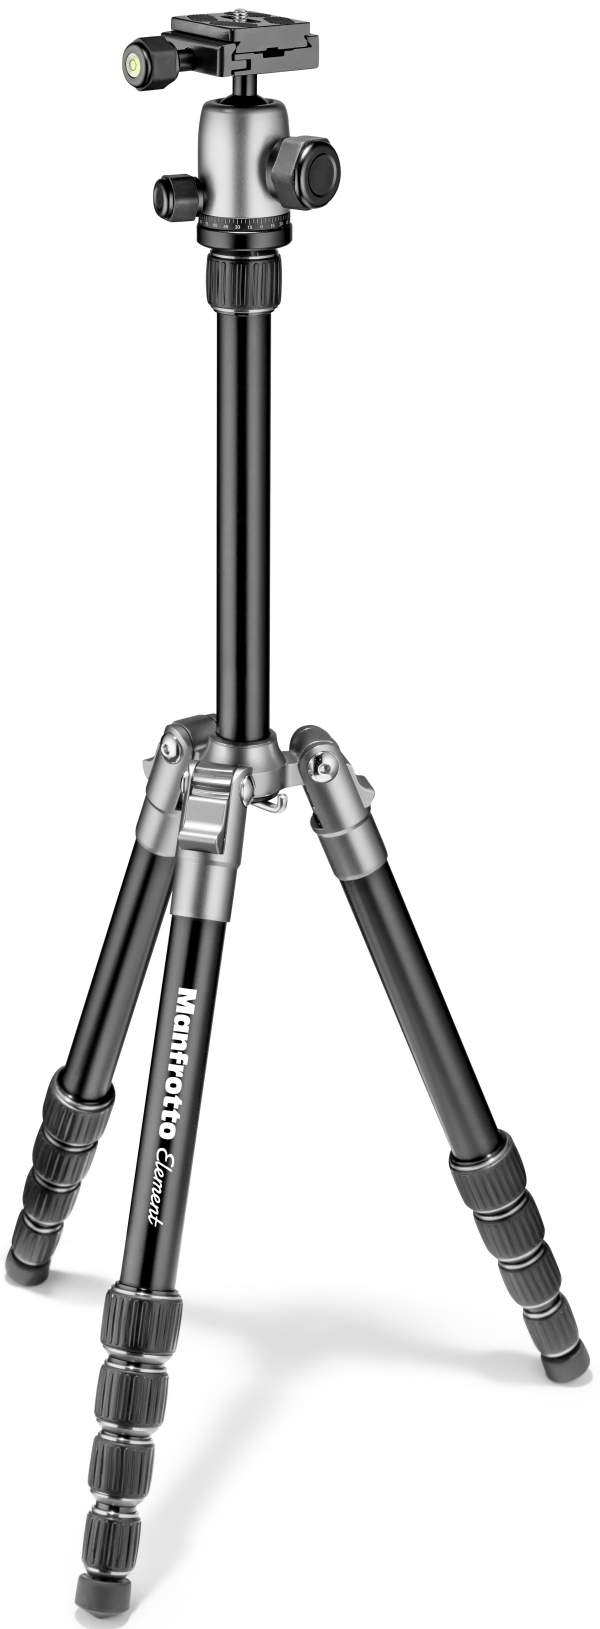 Statyw Manfrotto Element Traveller Small szary